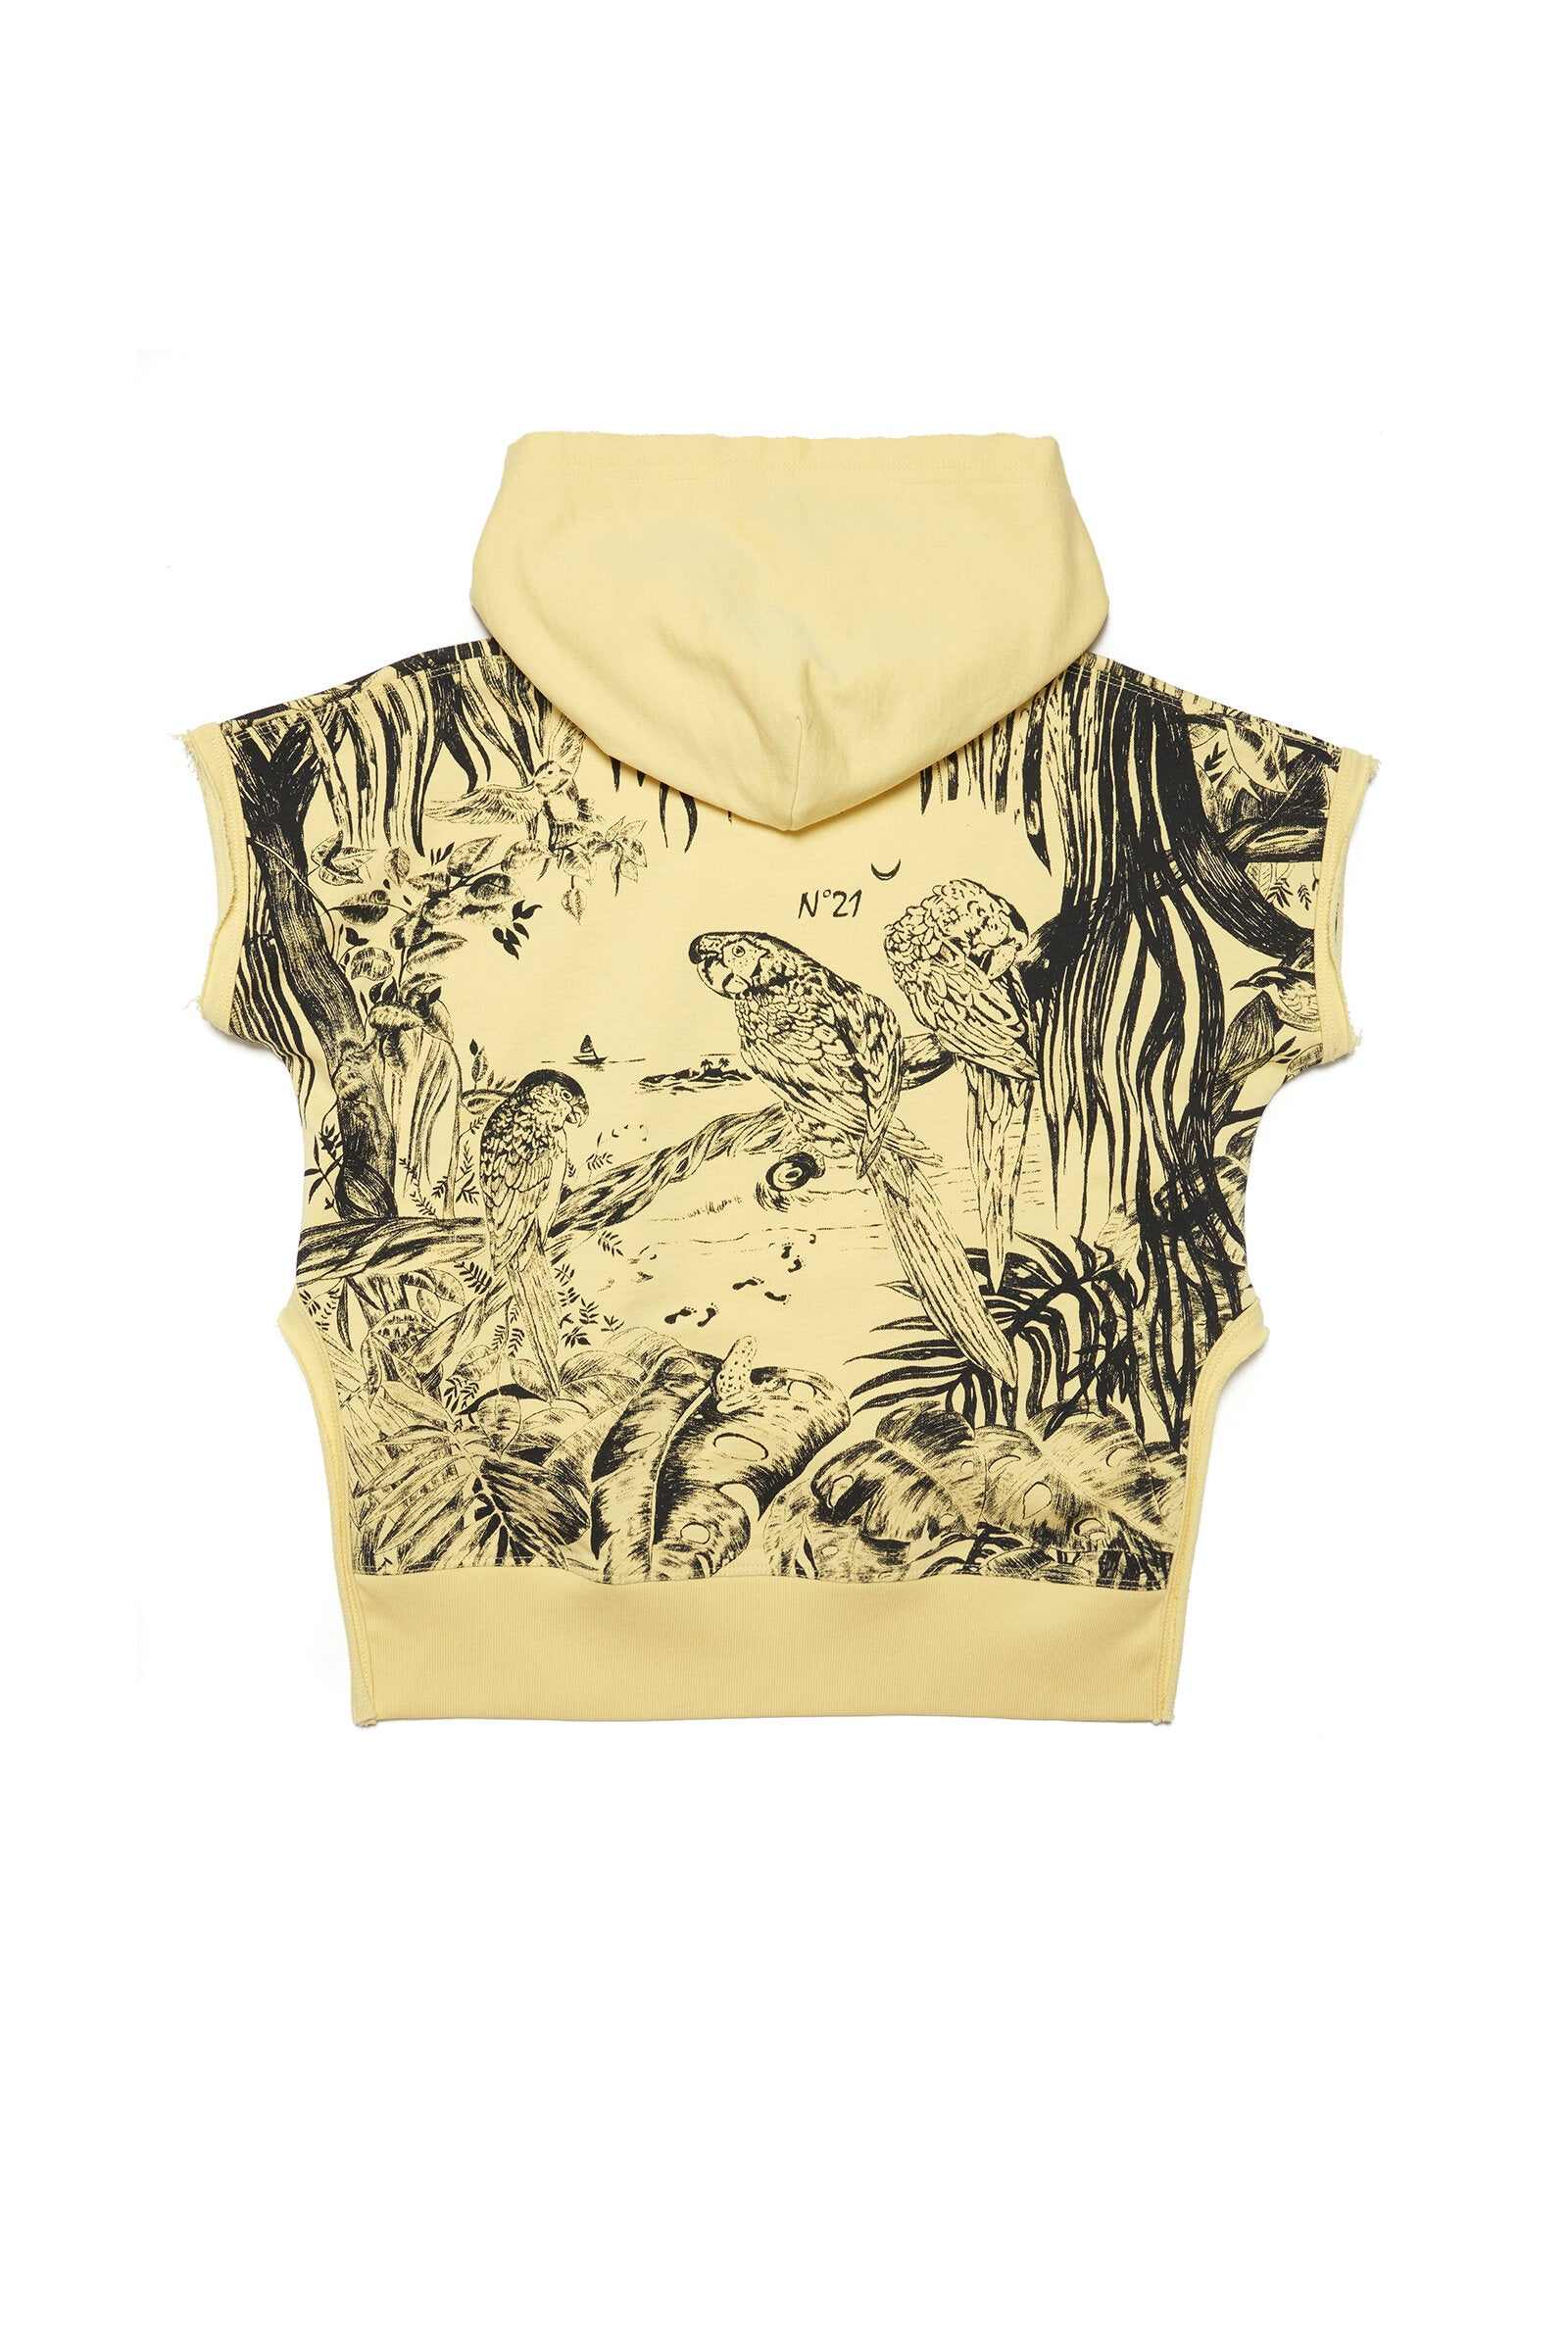 Yellow cotton hooded sweatshirt with side slits and asymmetric hem with vintage tropical print